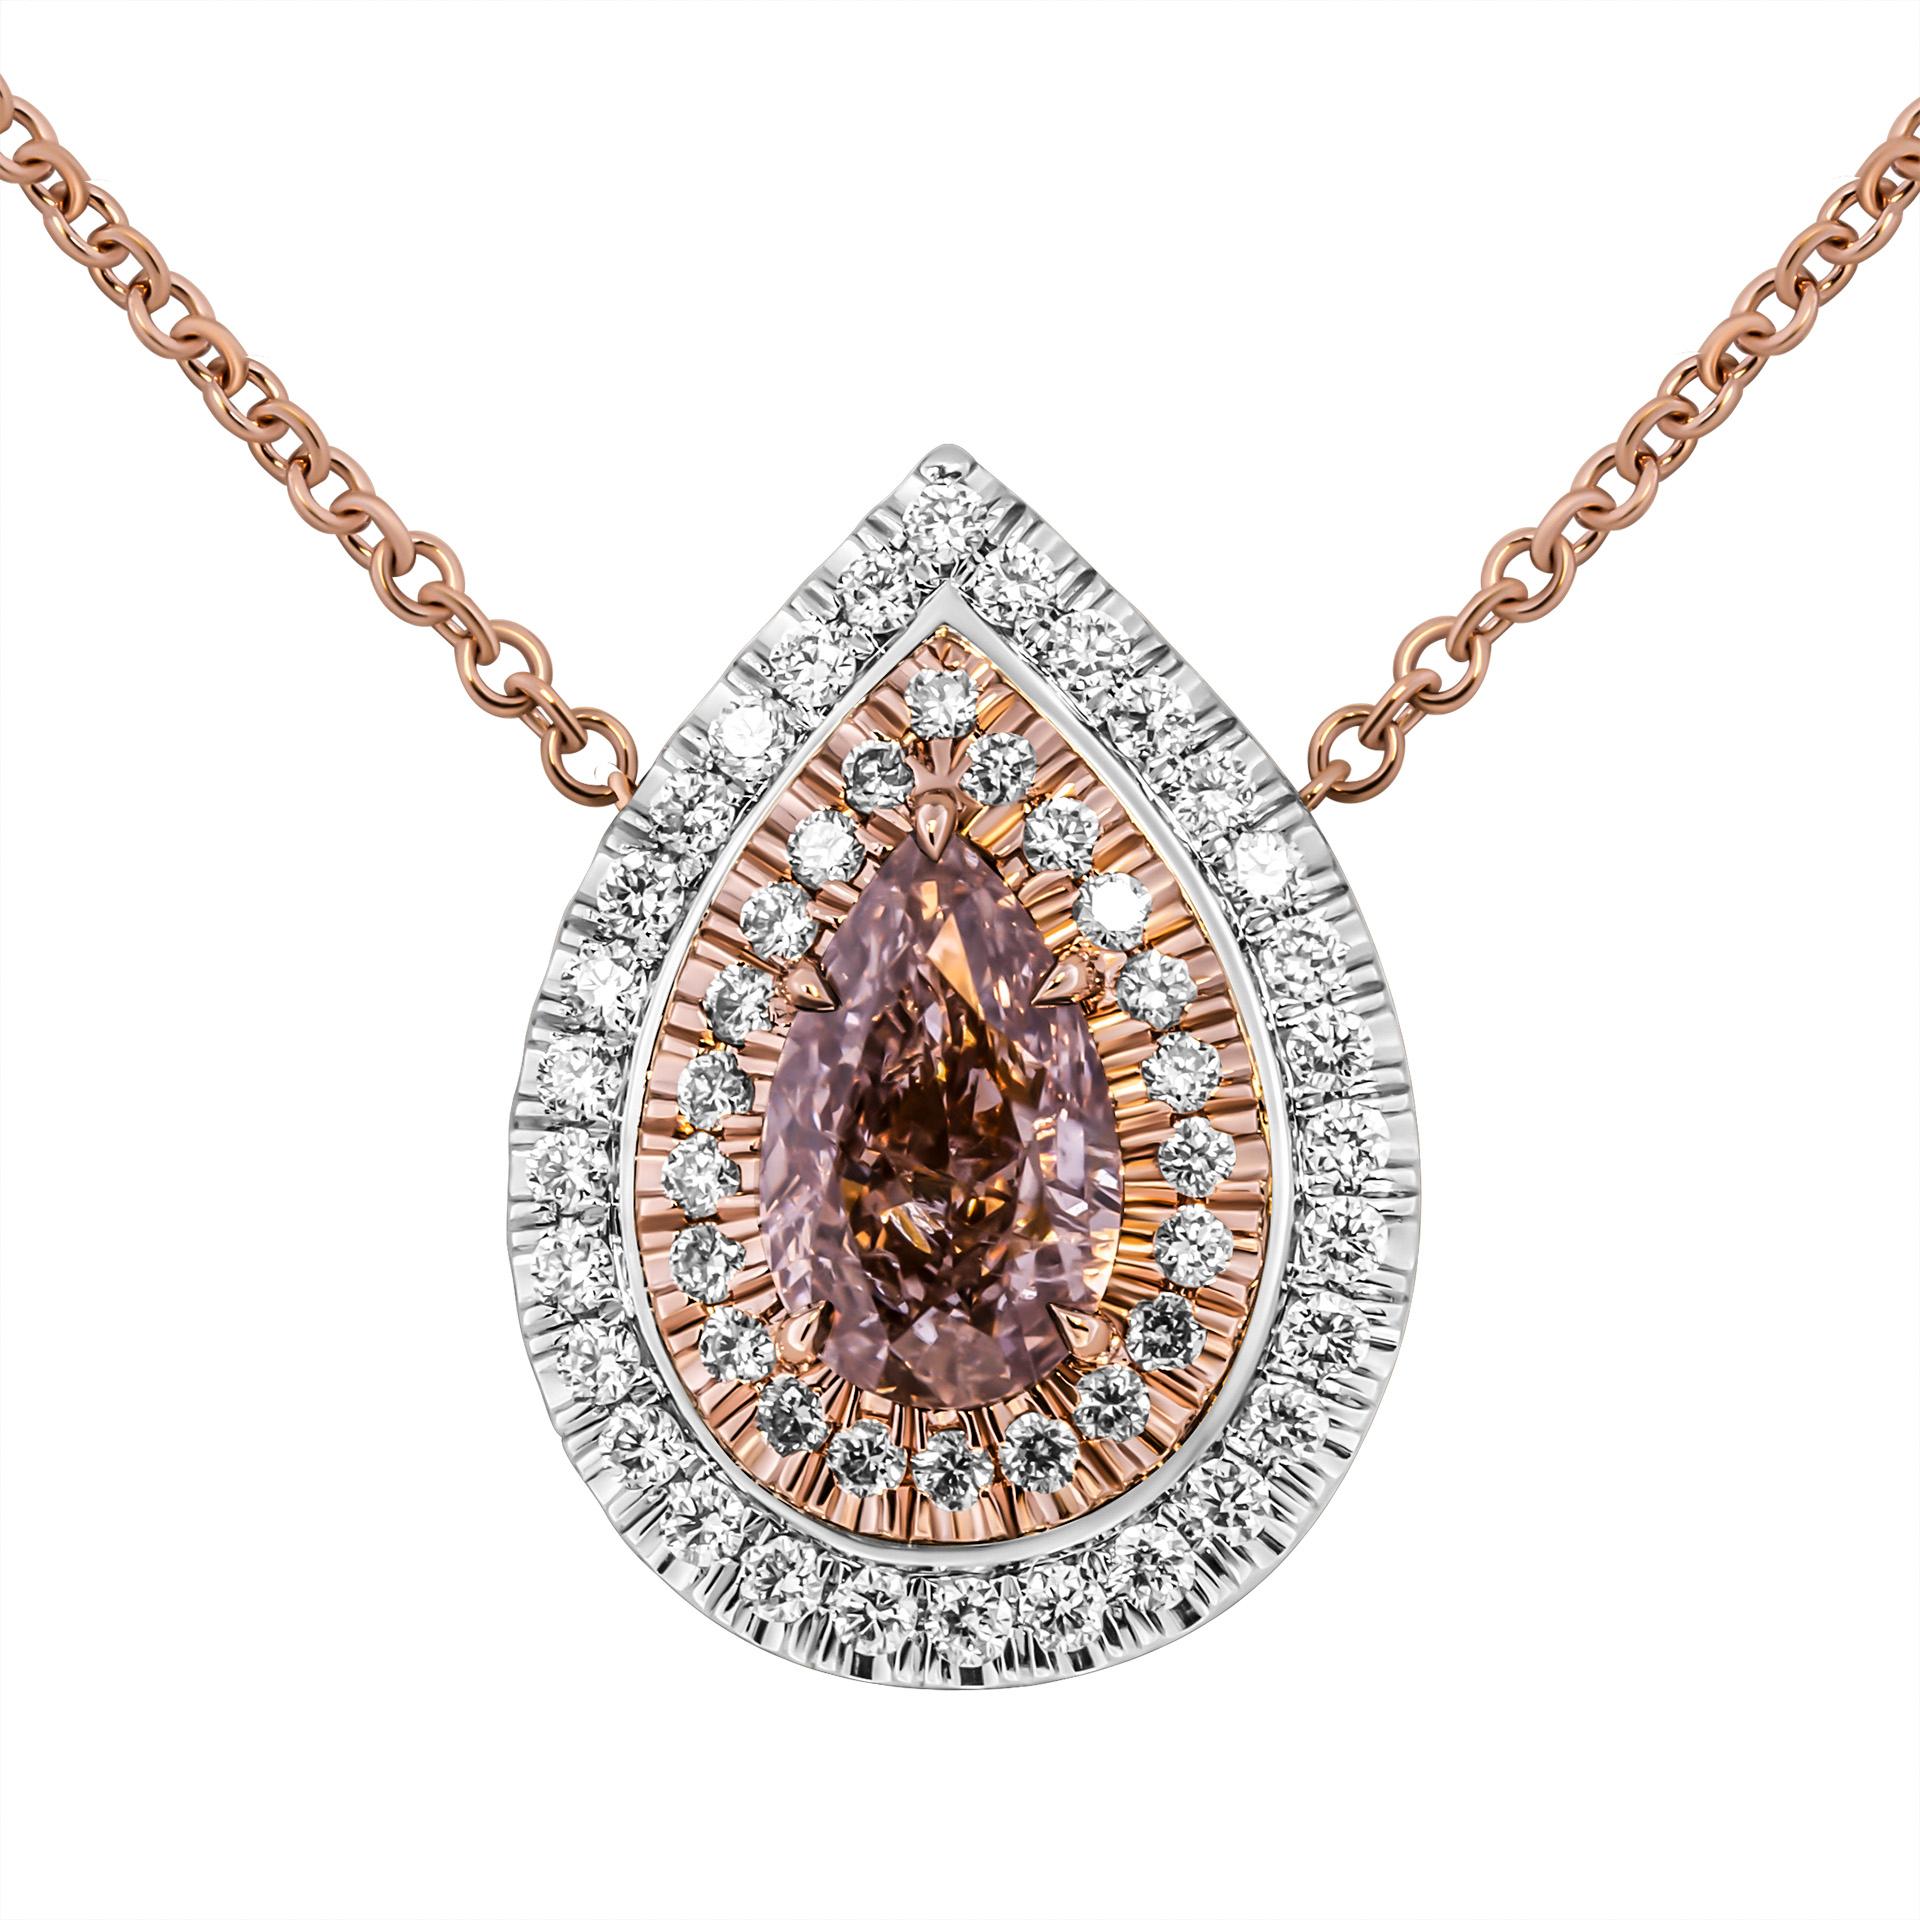 Double halo pendant in Platinum & 18K Rose Gold
Center Stone: 1.02ct Natural Fancy Pink-Brown, I2 Pear Shape Diamond GIA#1375129846 
Cable Chain 16